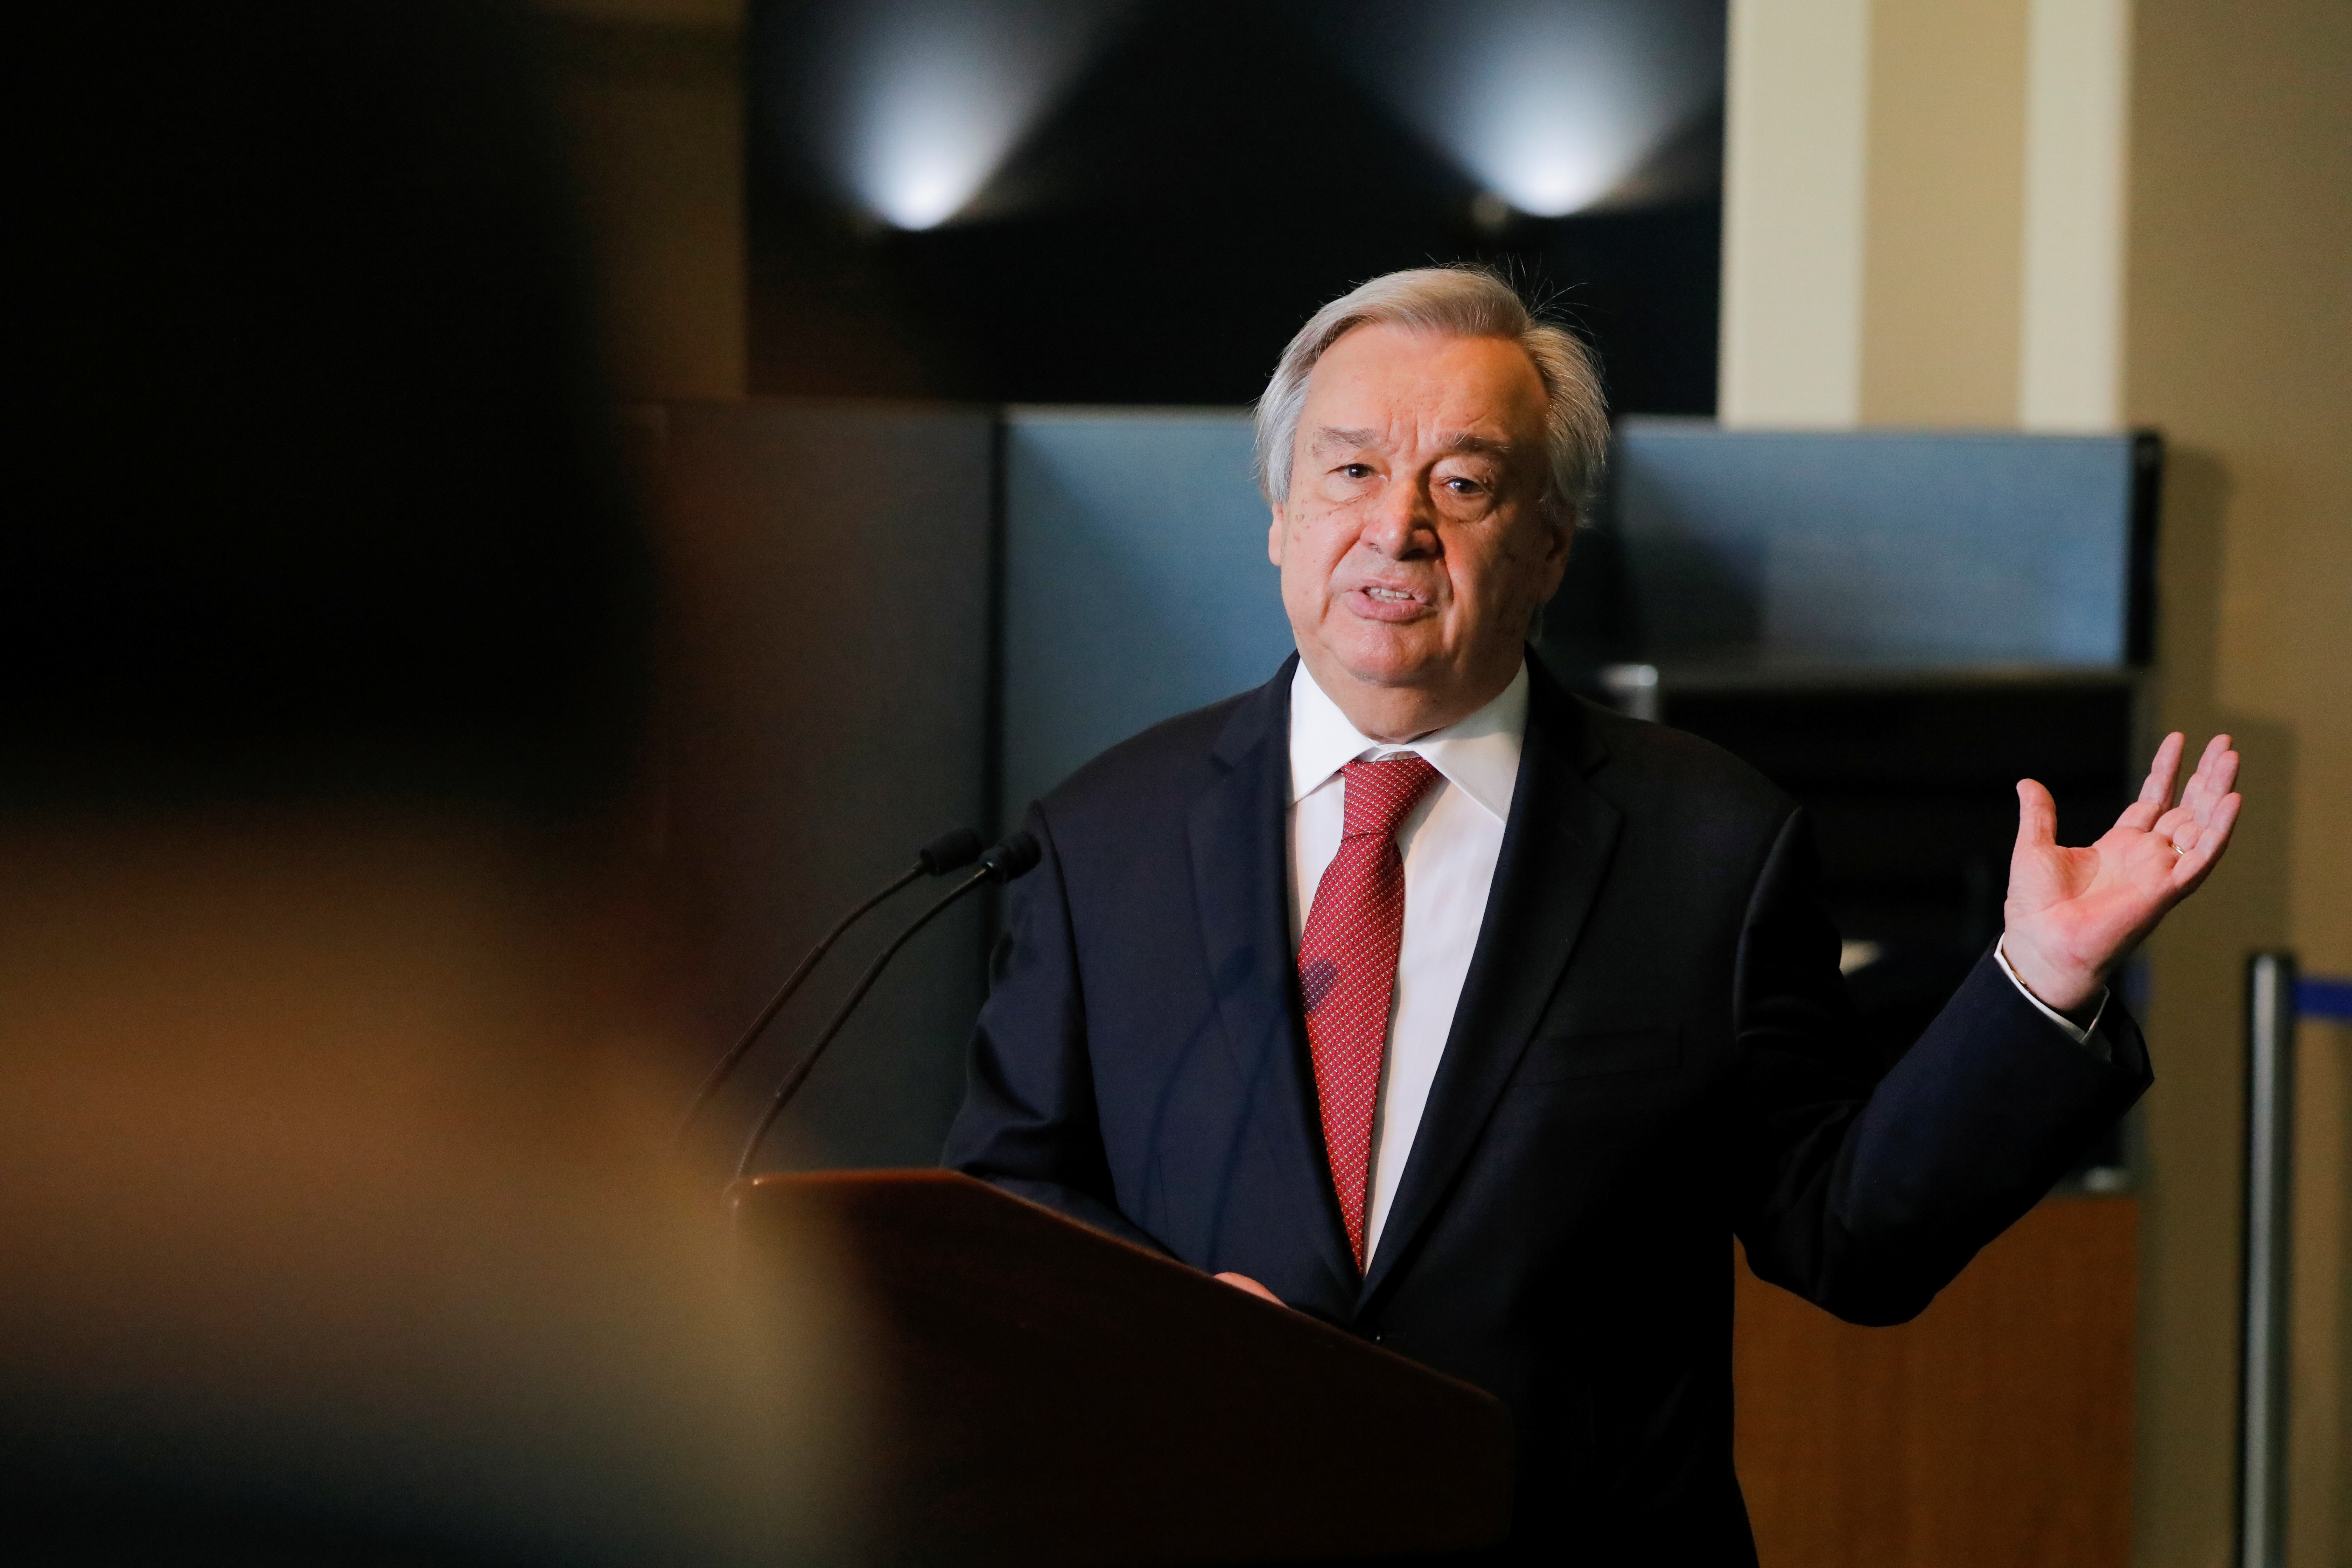 U.N. Secretary-General Antonio Guterres speaks as U.N. General Assembly appointed him for a second five-year term from January 1, 2022, in New York City